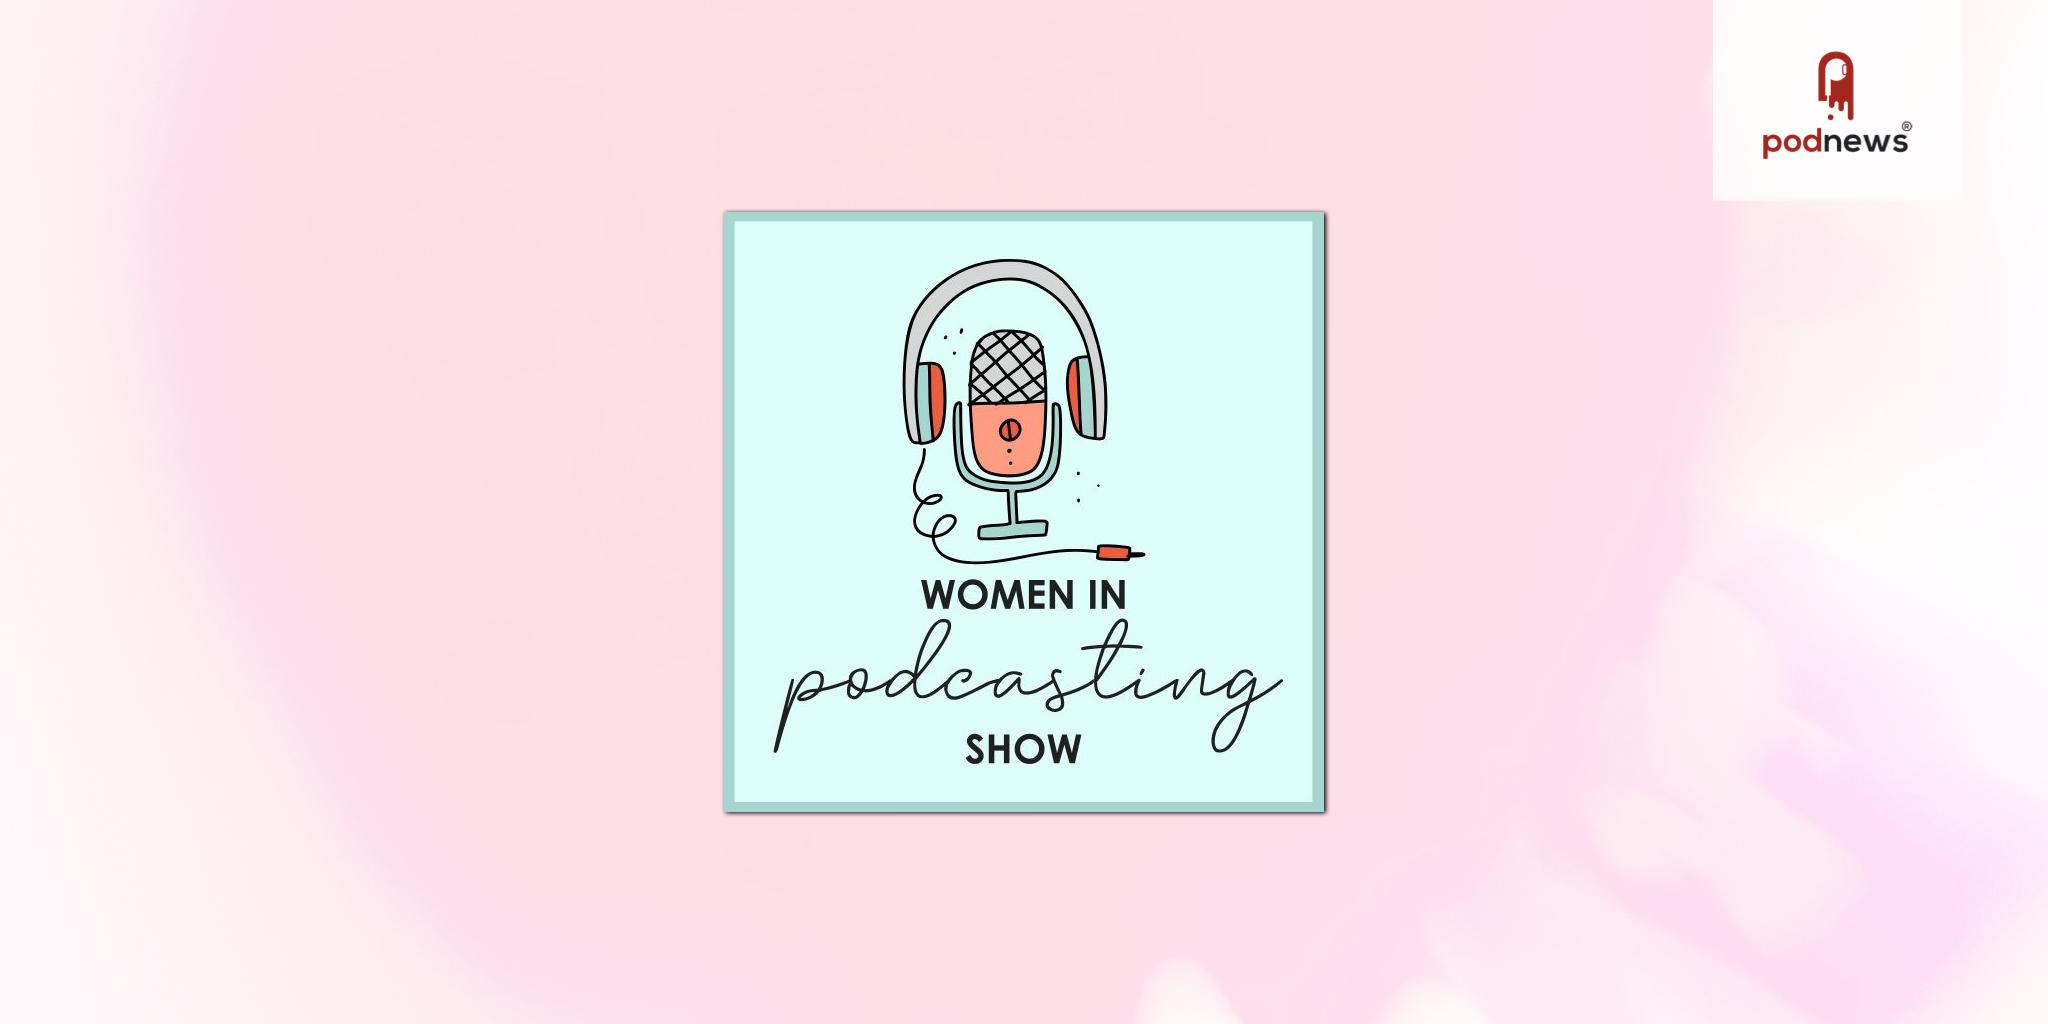 Women in Podcasting Network reaches 9,000 members